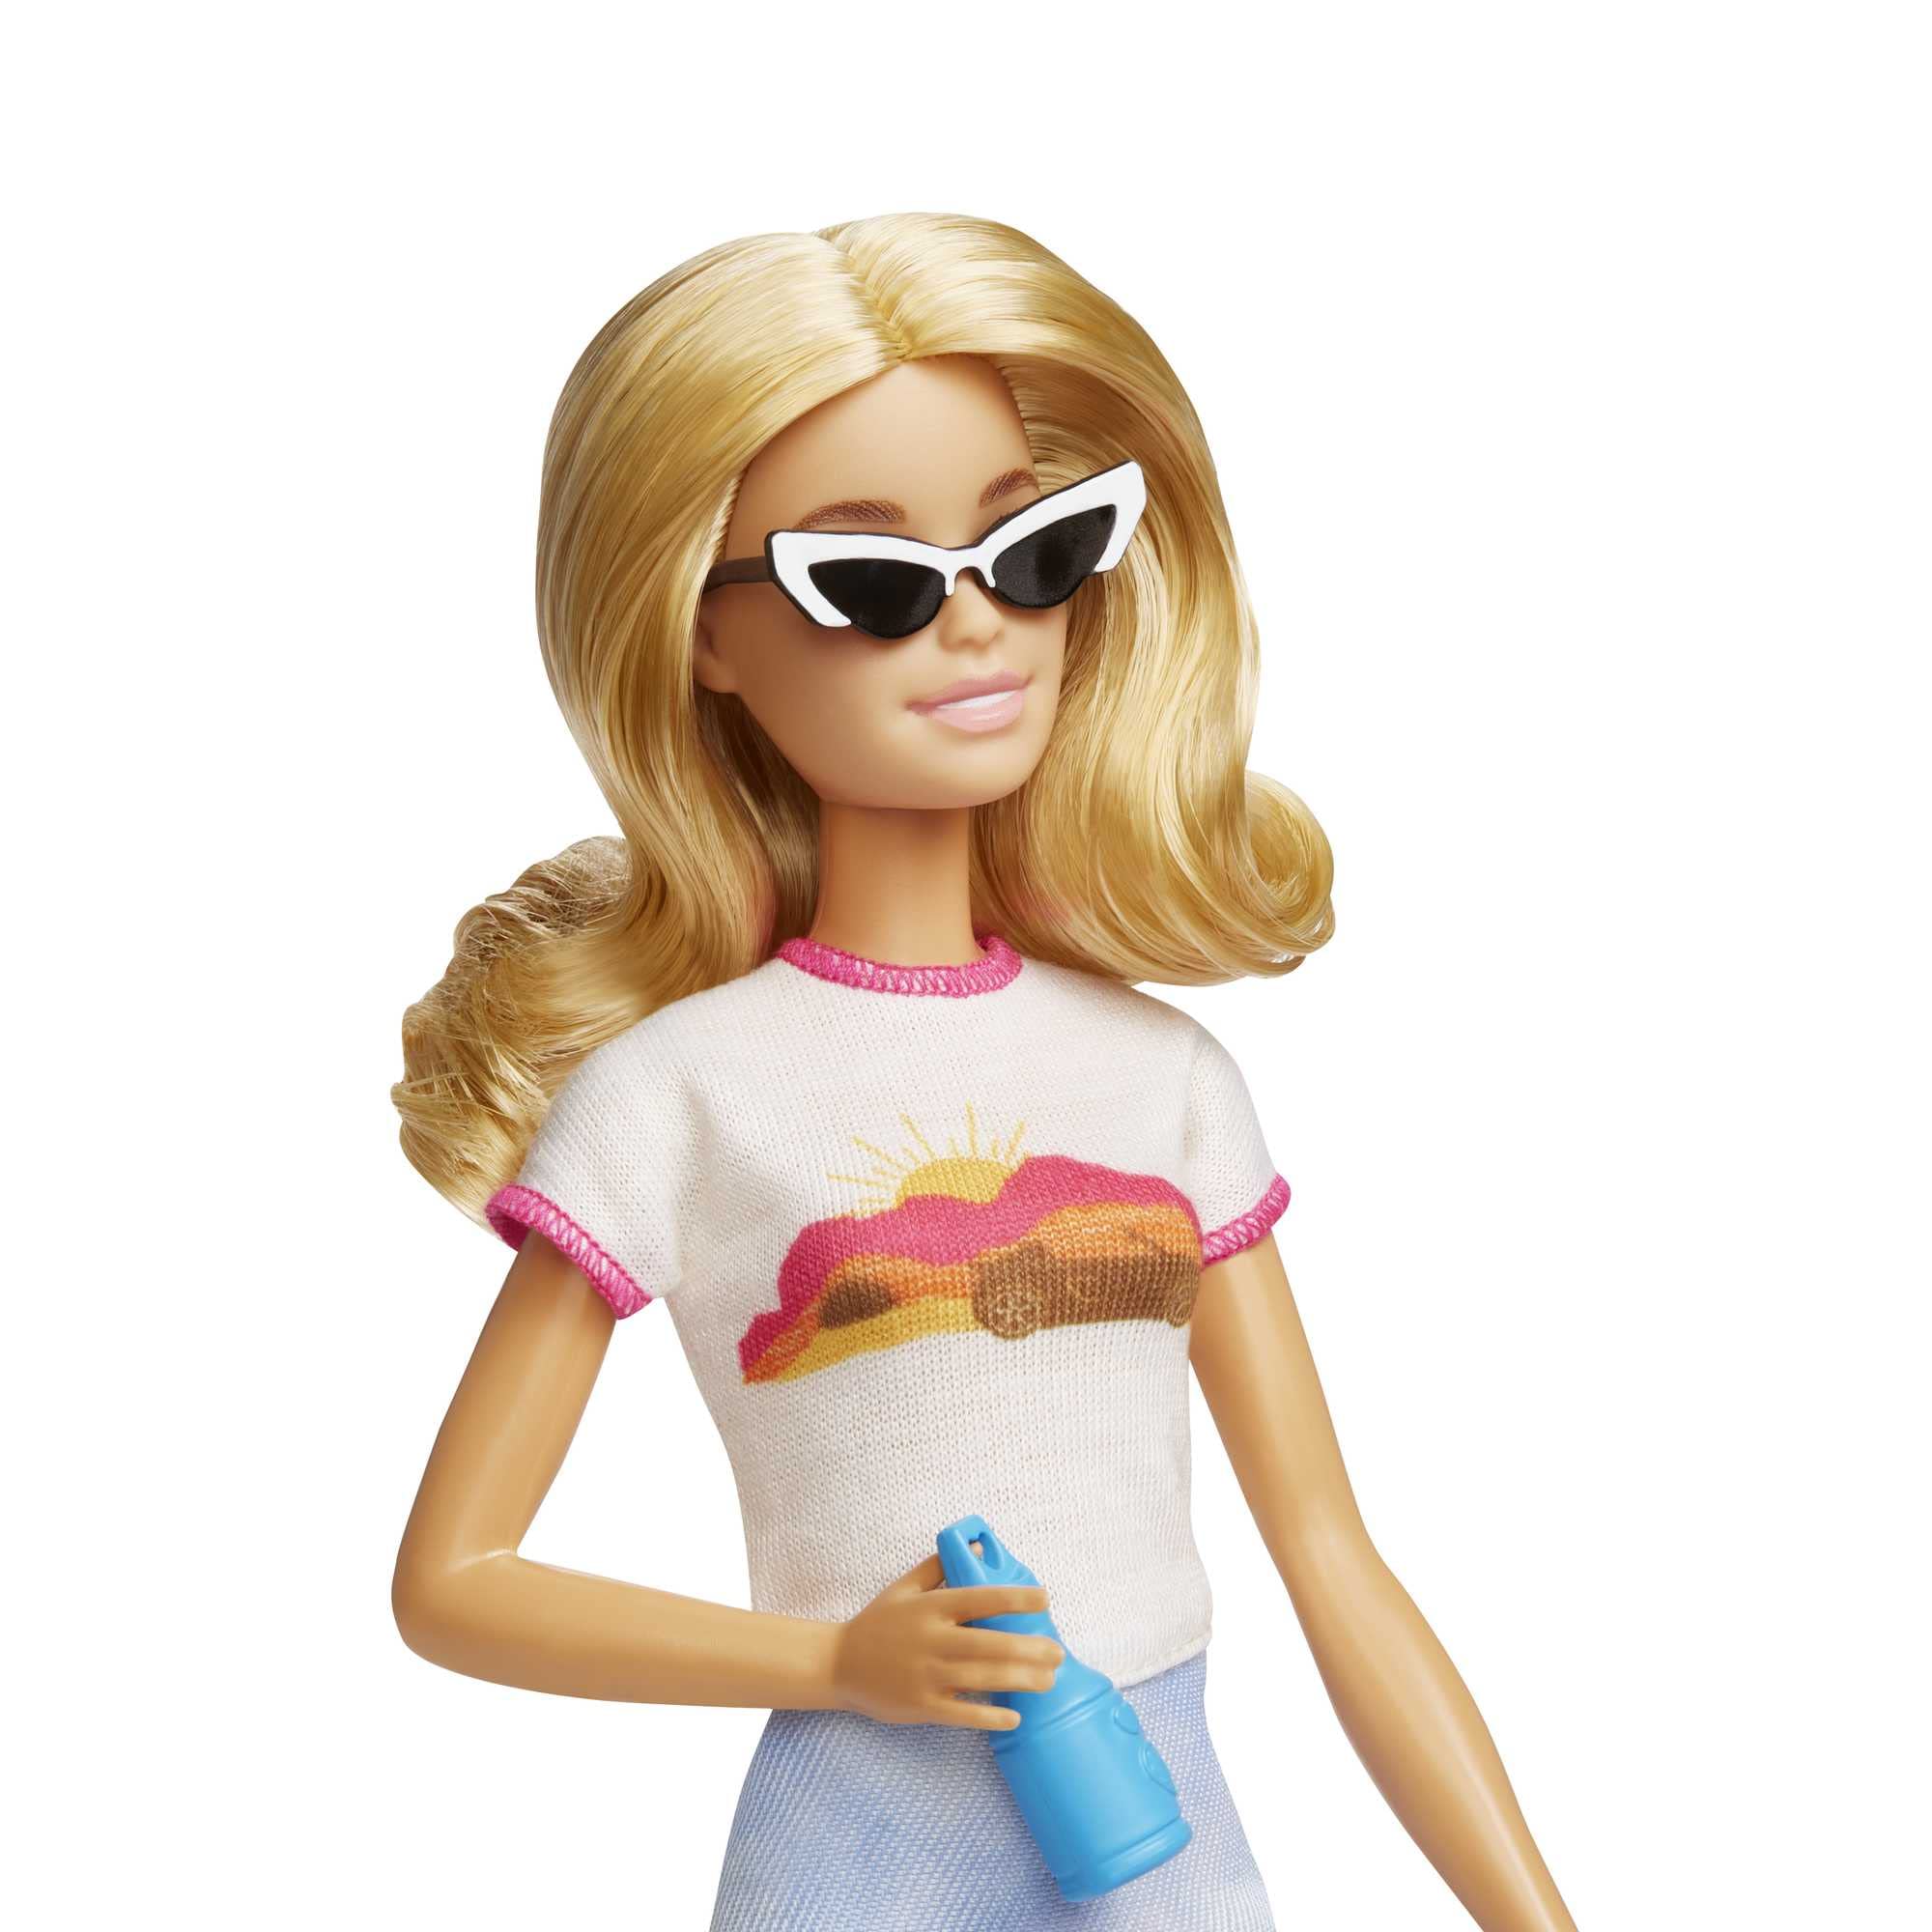 Barbie Doll & Accessories, Travel Set with Puppy and 10+ Pieces, Suitcase Opens & Closes, Malibu Doll with Blonde Hair